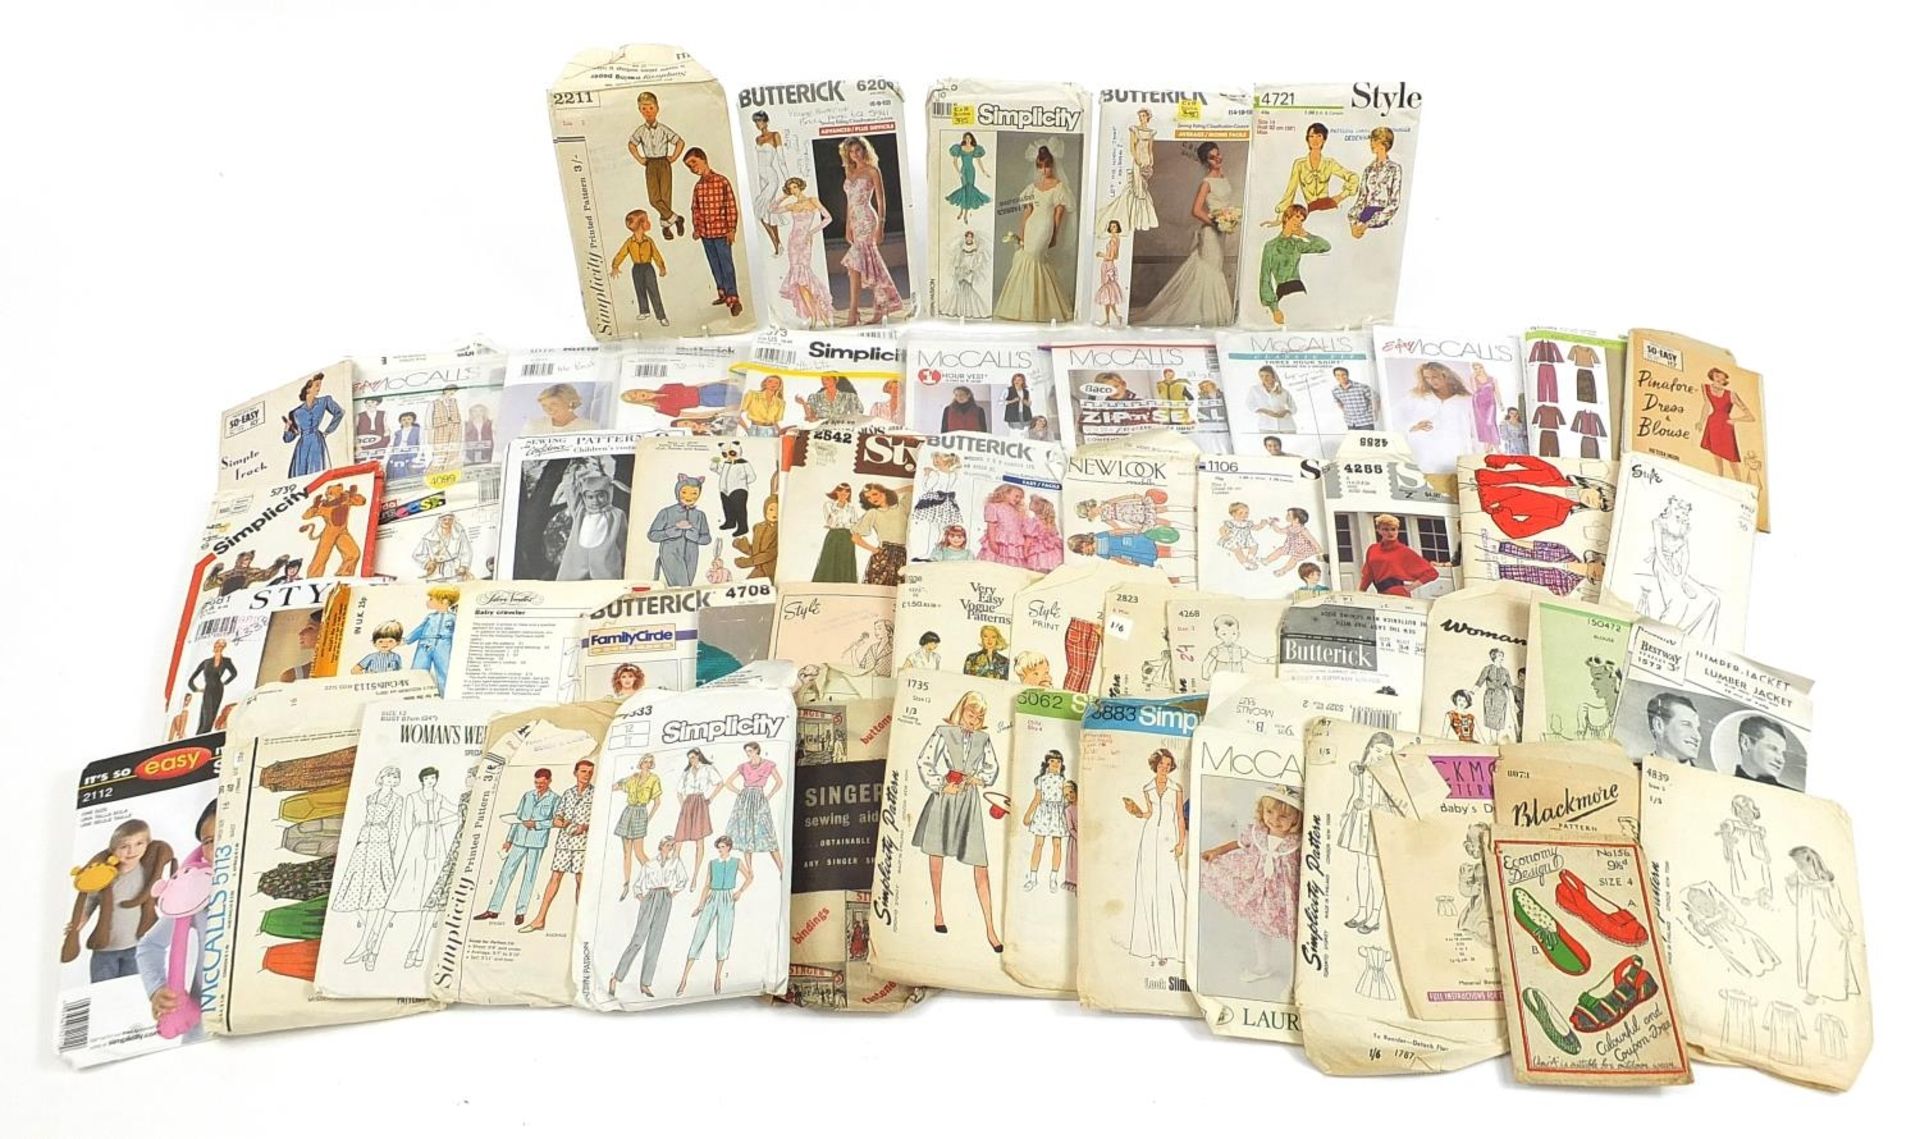 Vintage sewing patterns including Simplicity, Butterick, McCalls and Style